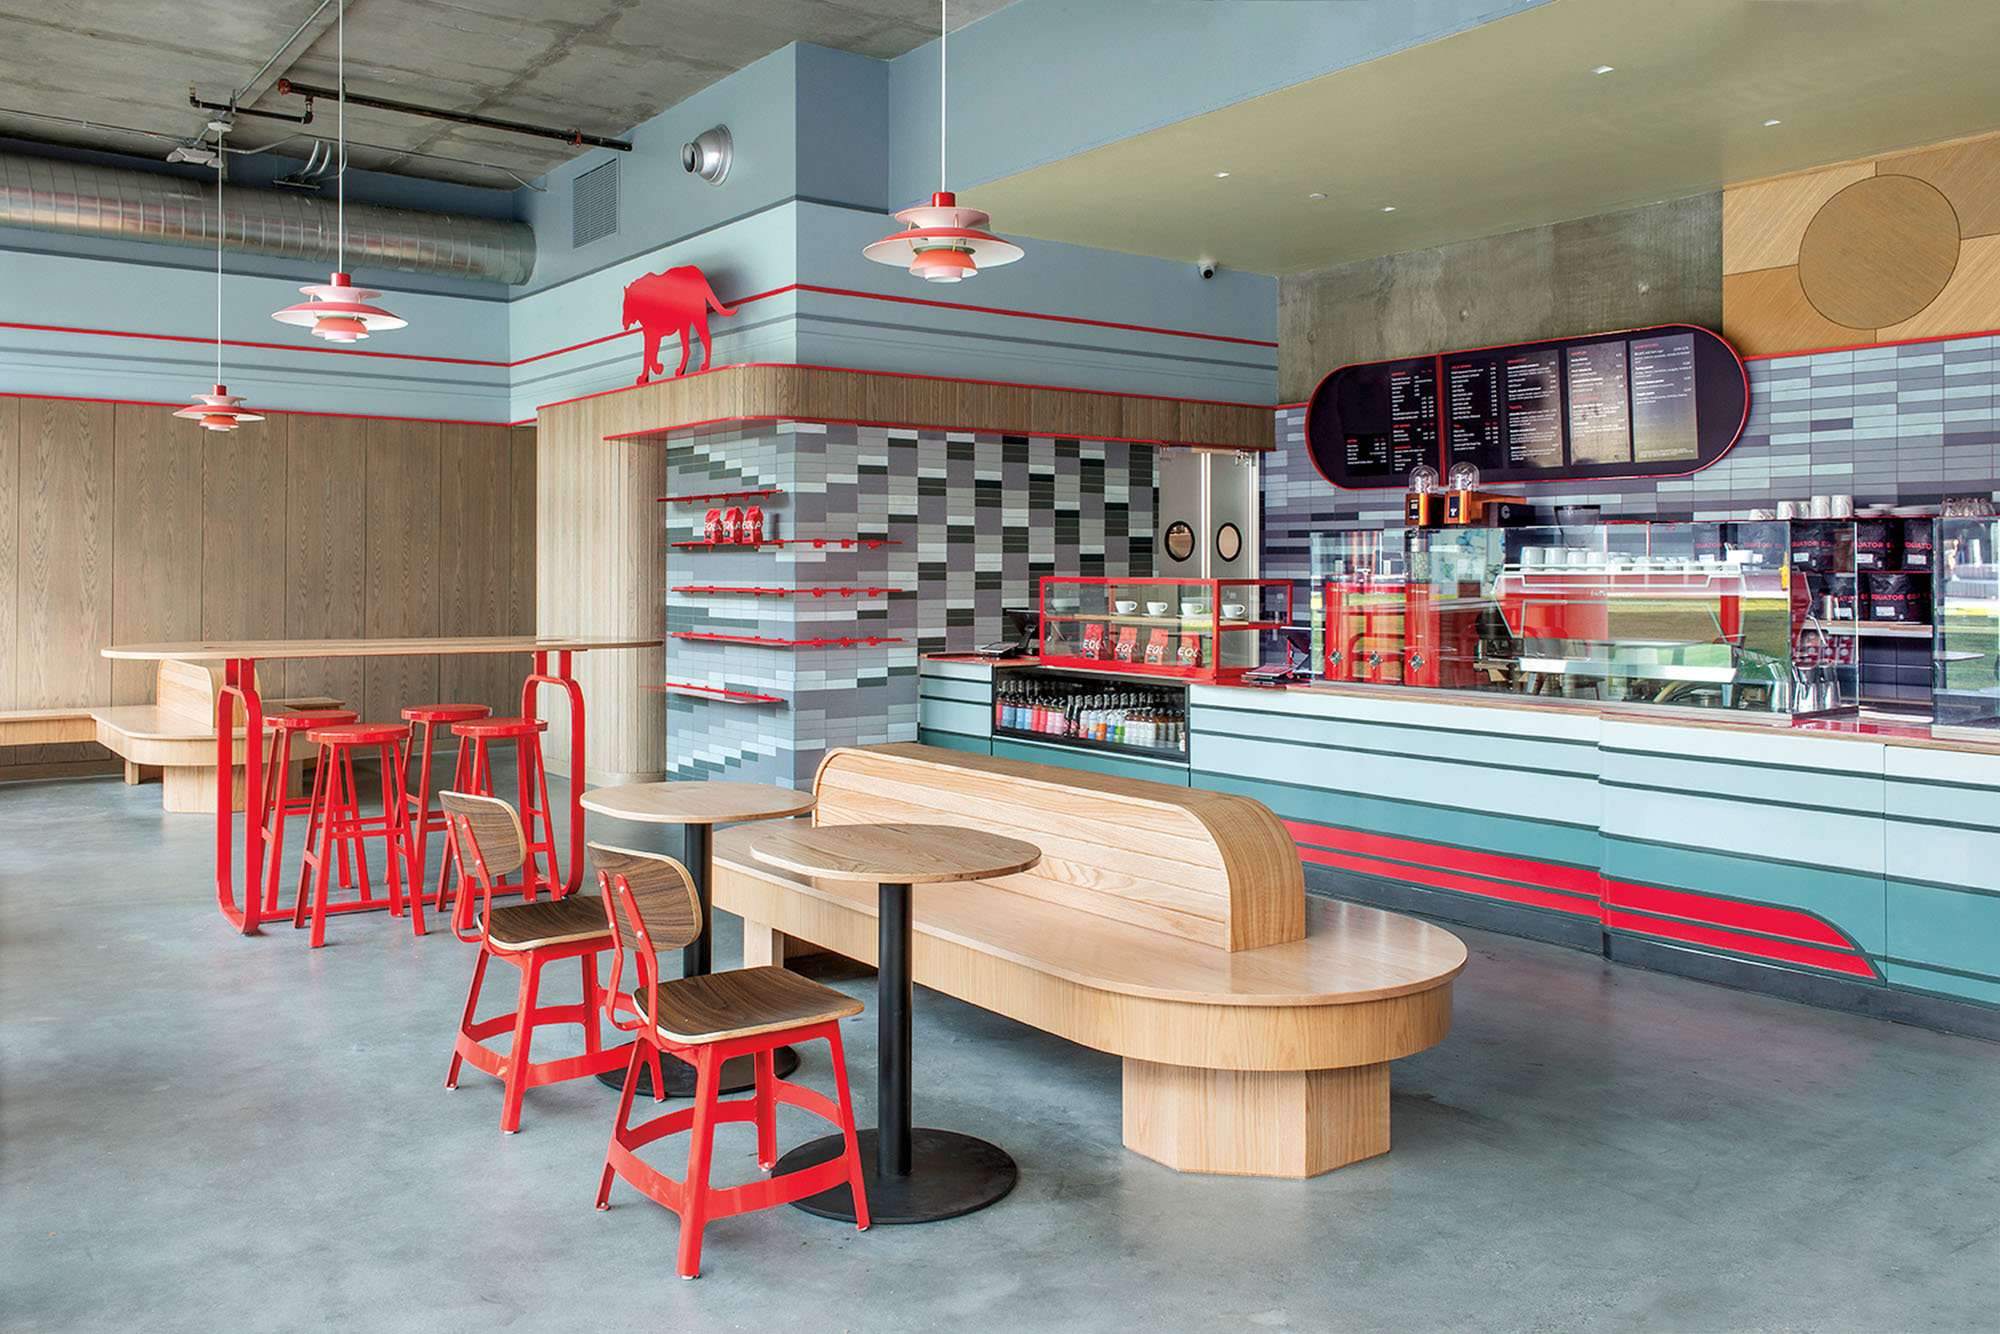 A photograph of the interior of a coffee shop with red and blue accents